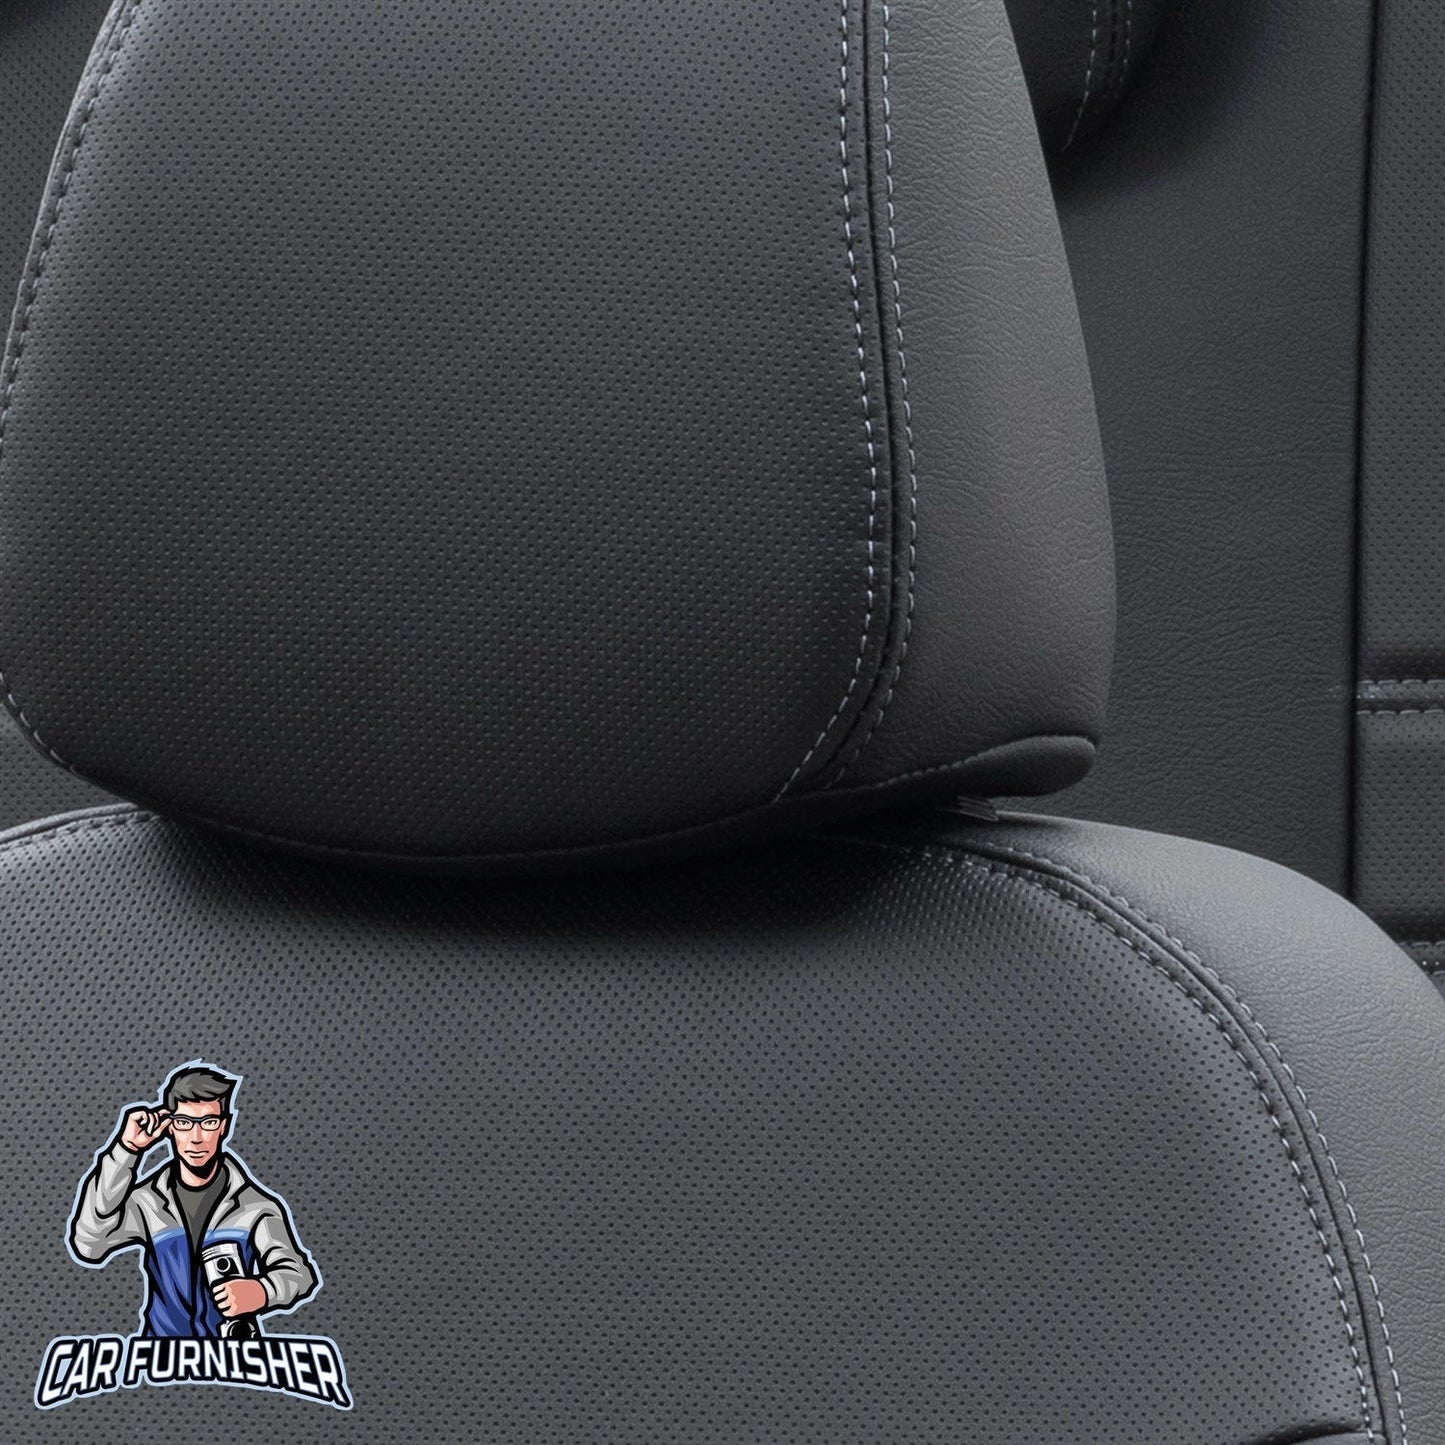 Ford Galaxy Seat Covers Istanbul Leather Design Black Leather